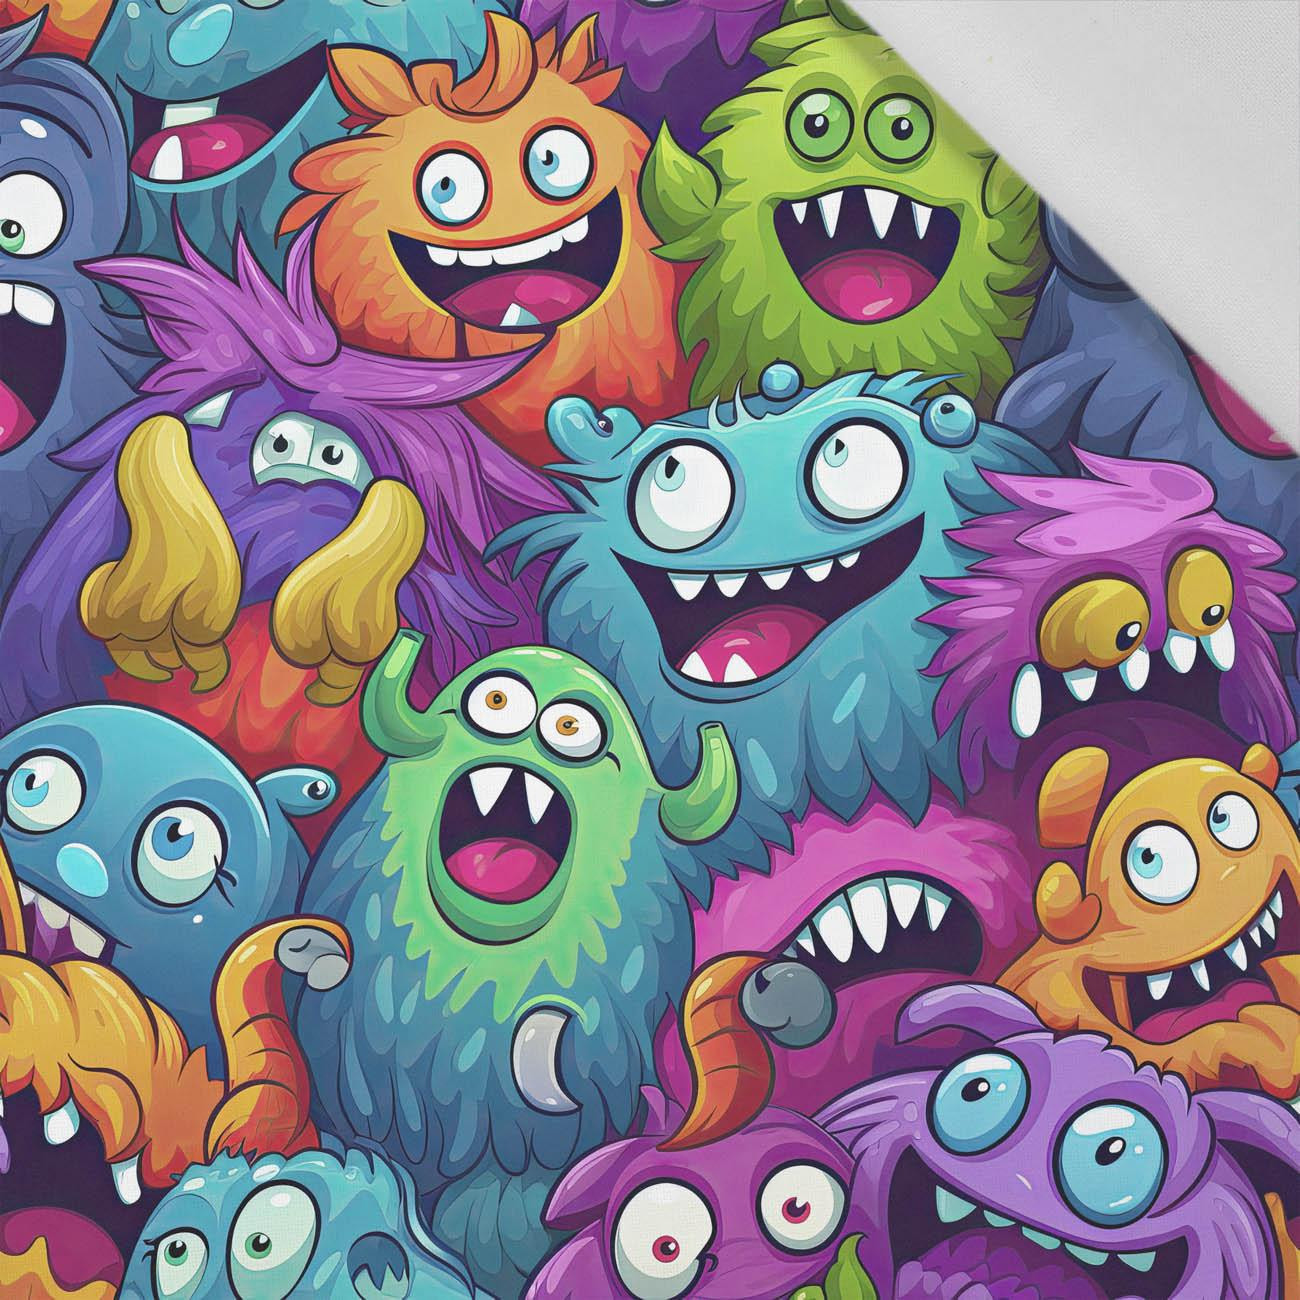 CRAZY MONSTERS PAT. 2 - Cotton woven fabric